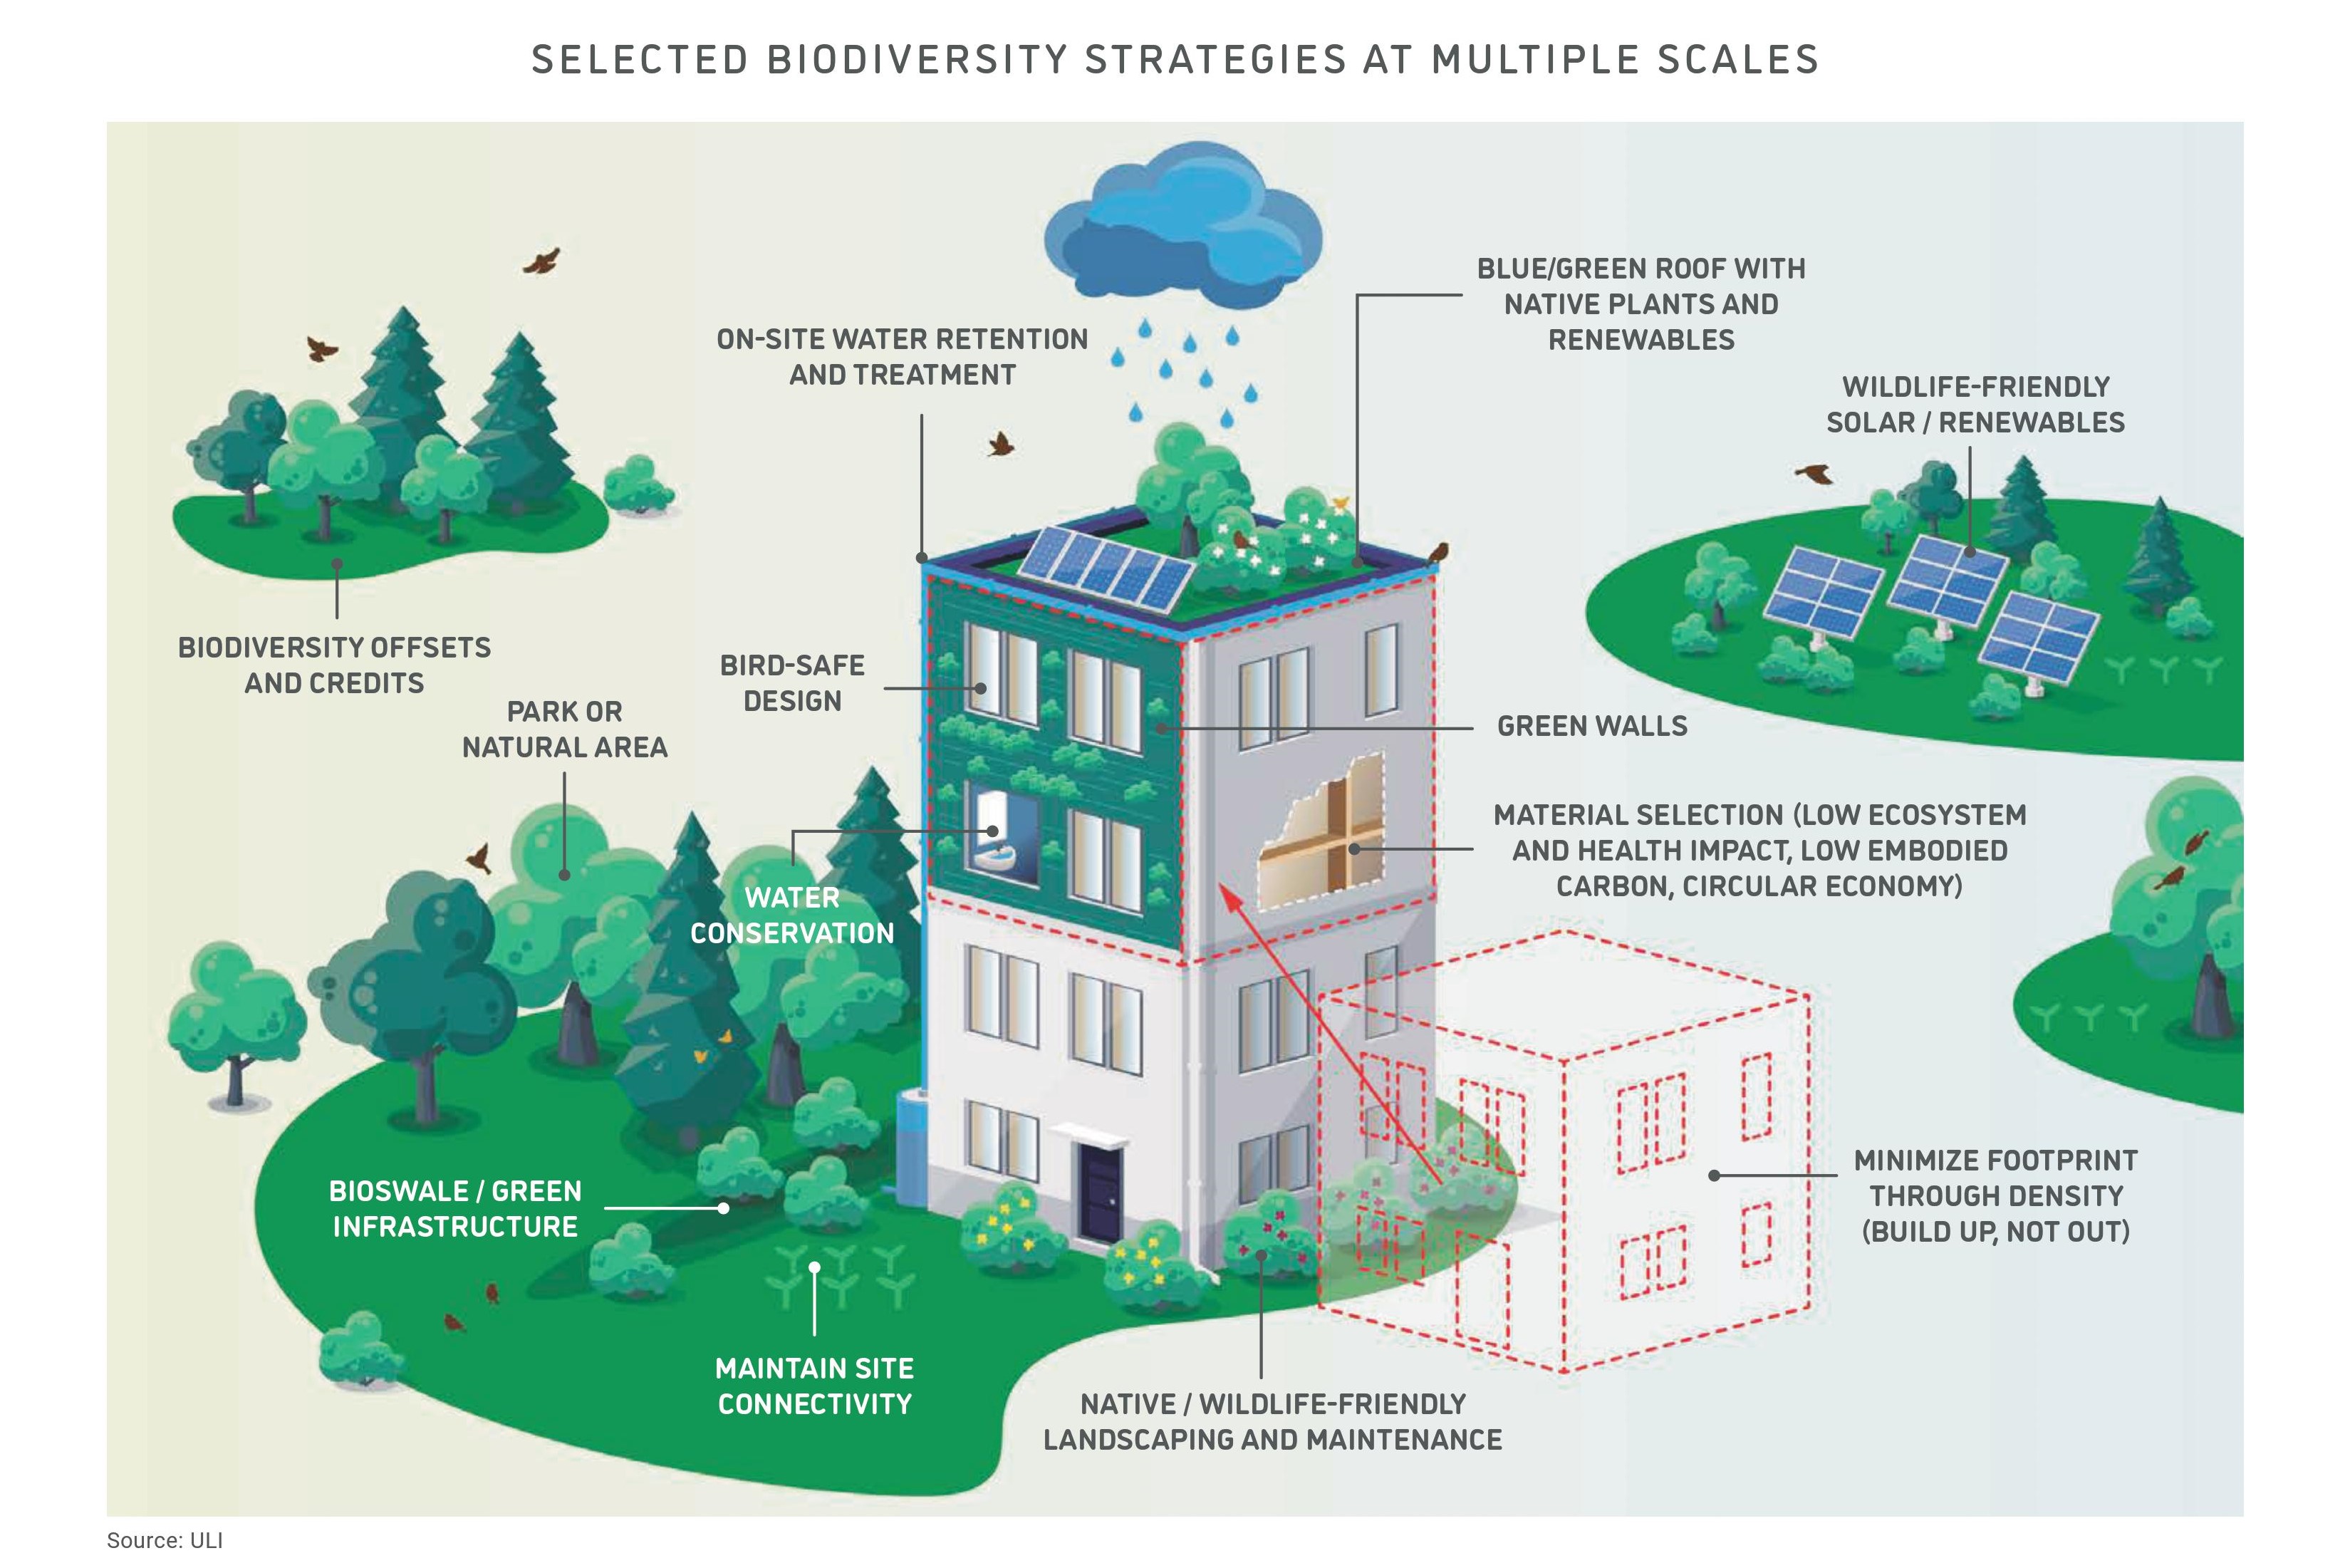 Selected biodiversity strategies at multiple scales infographic